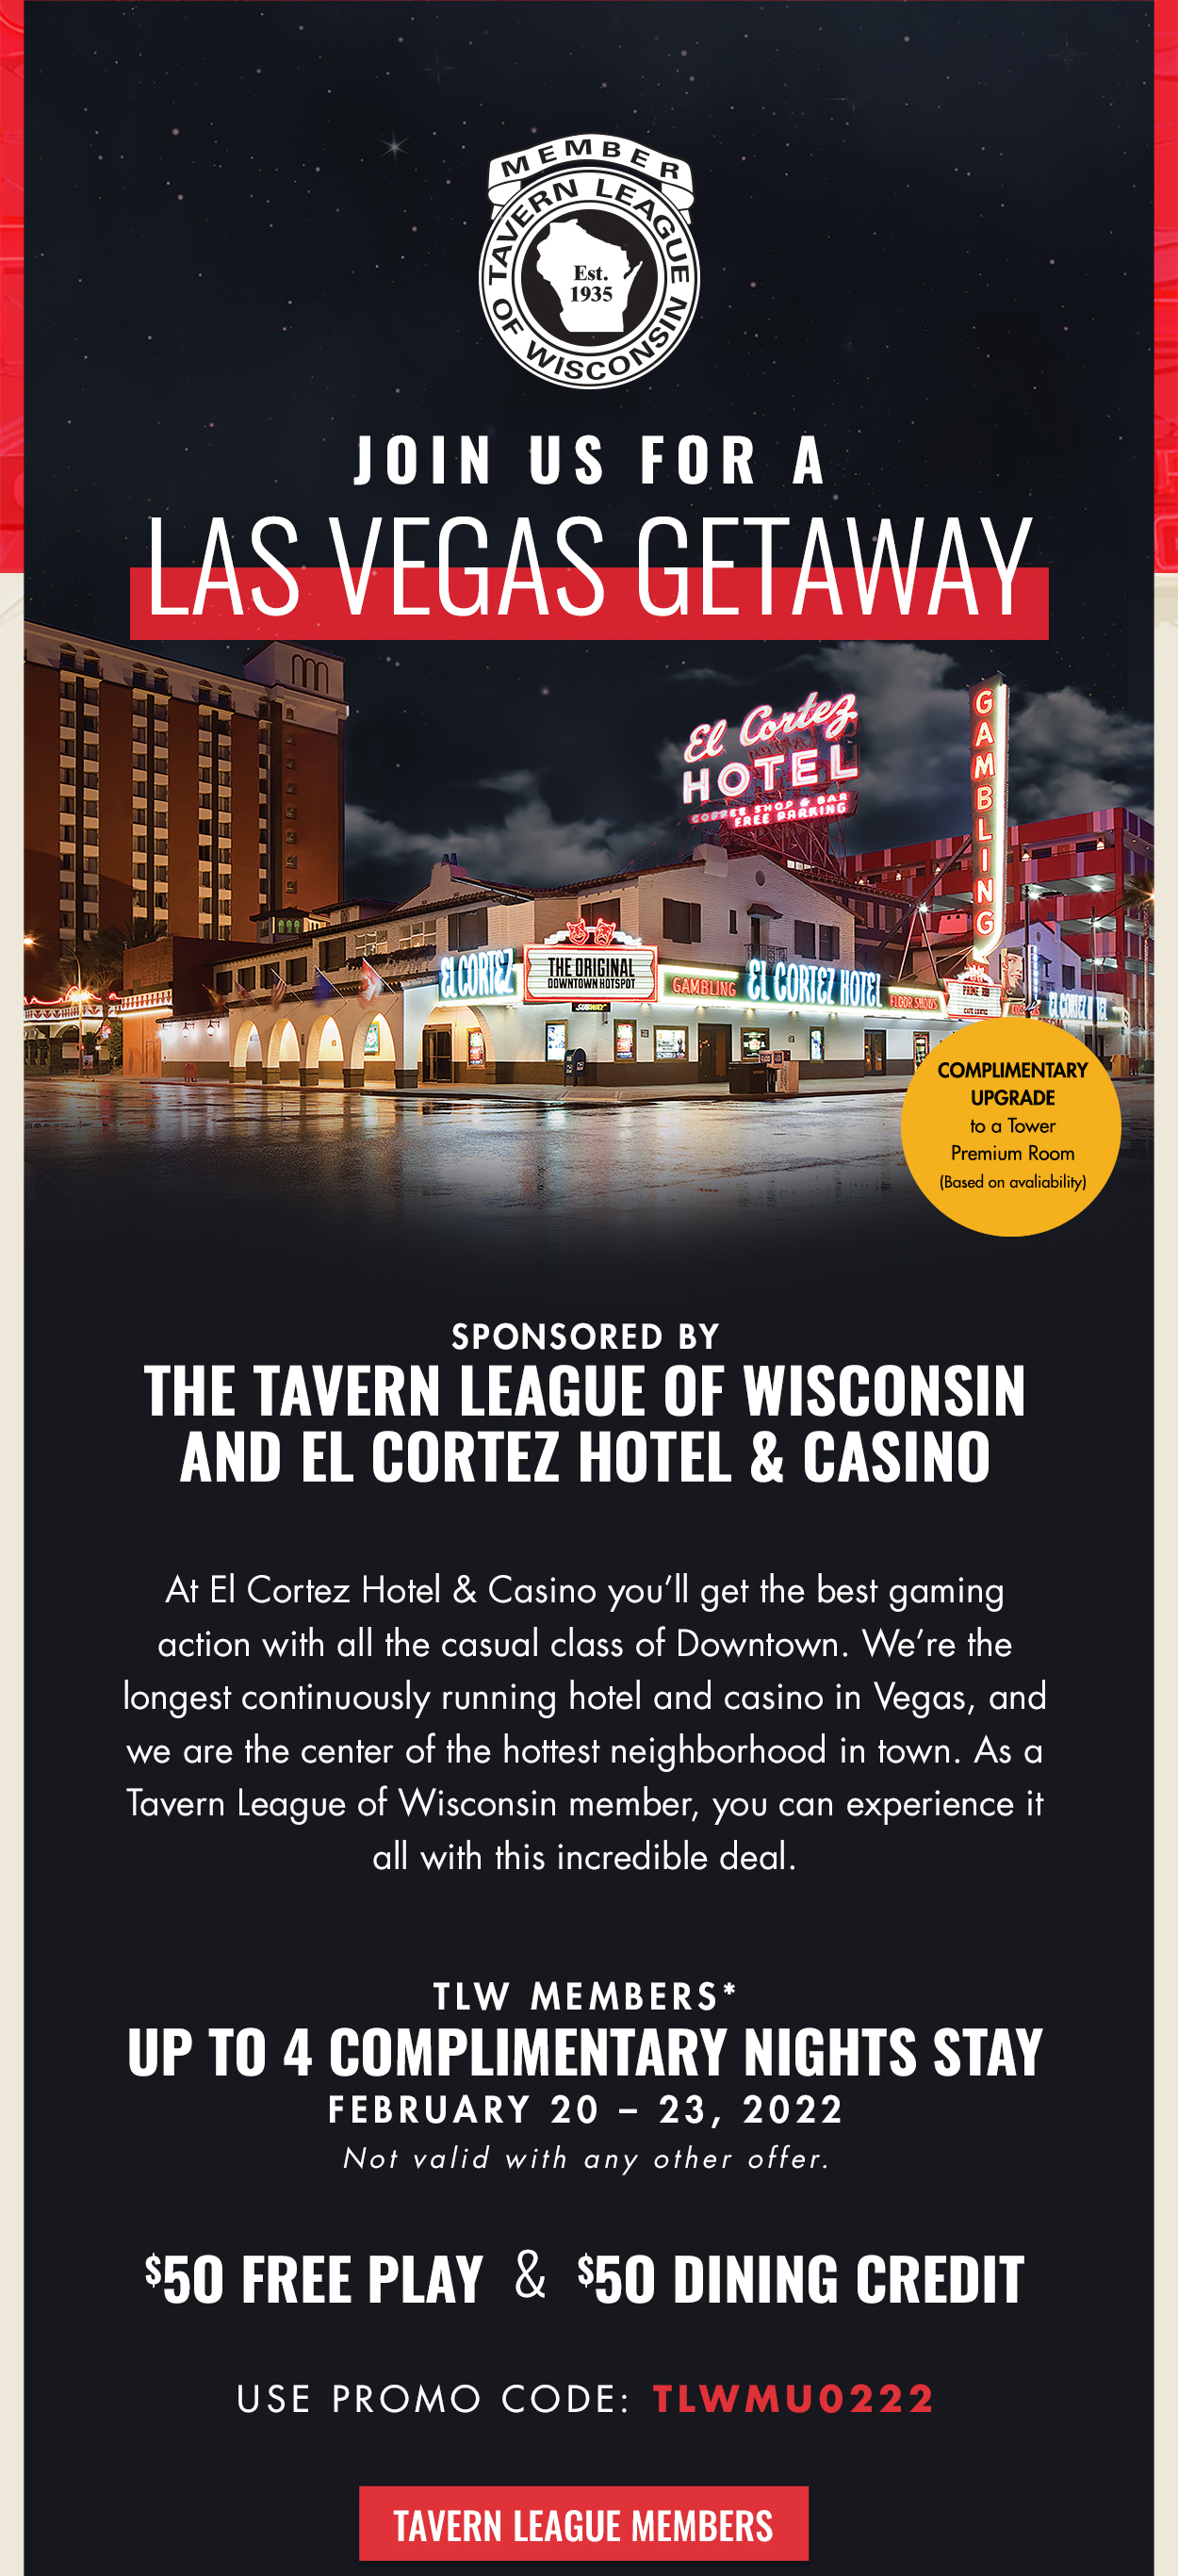 Sponsored by The Tavern League of Wisconsin and El Cortez Hotel and Casino